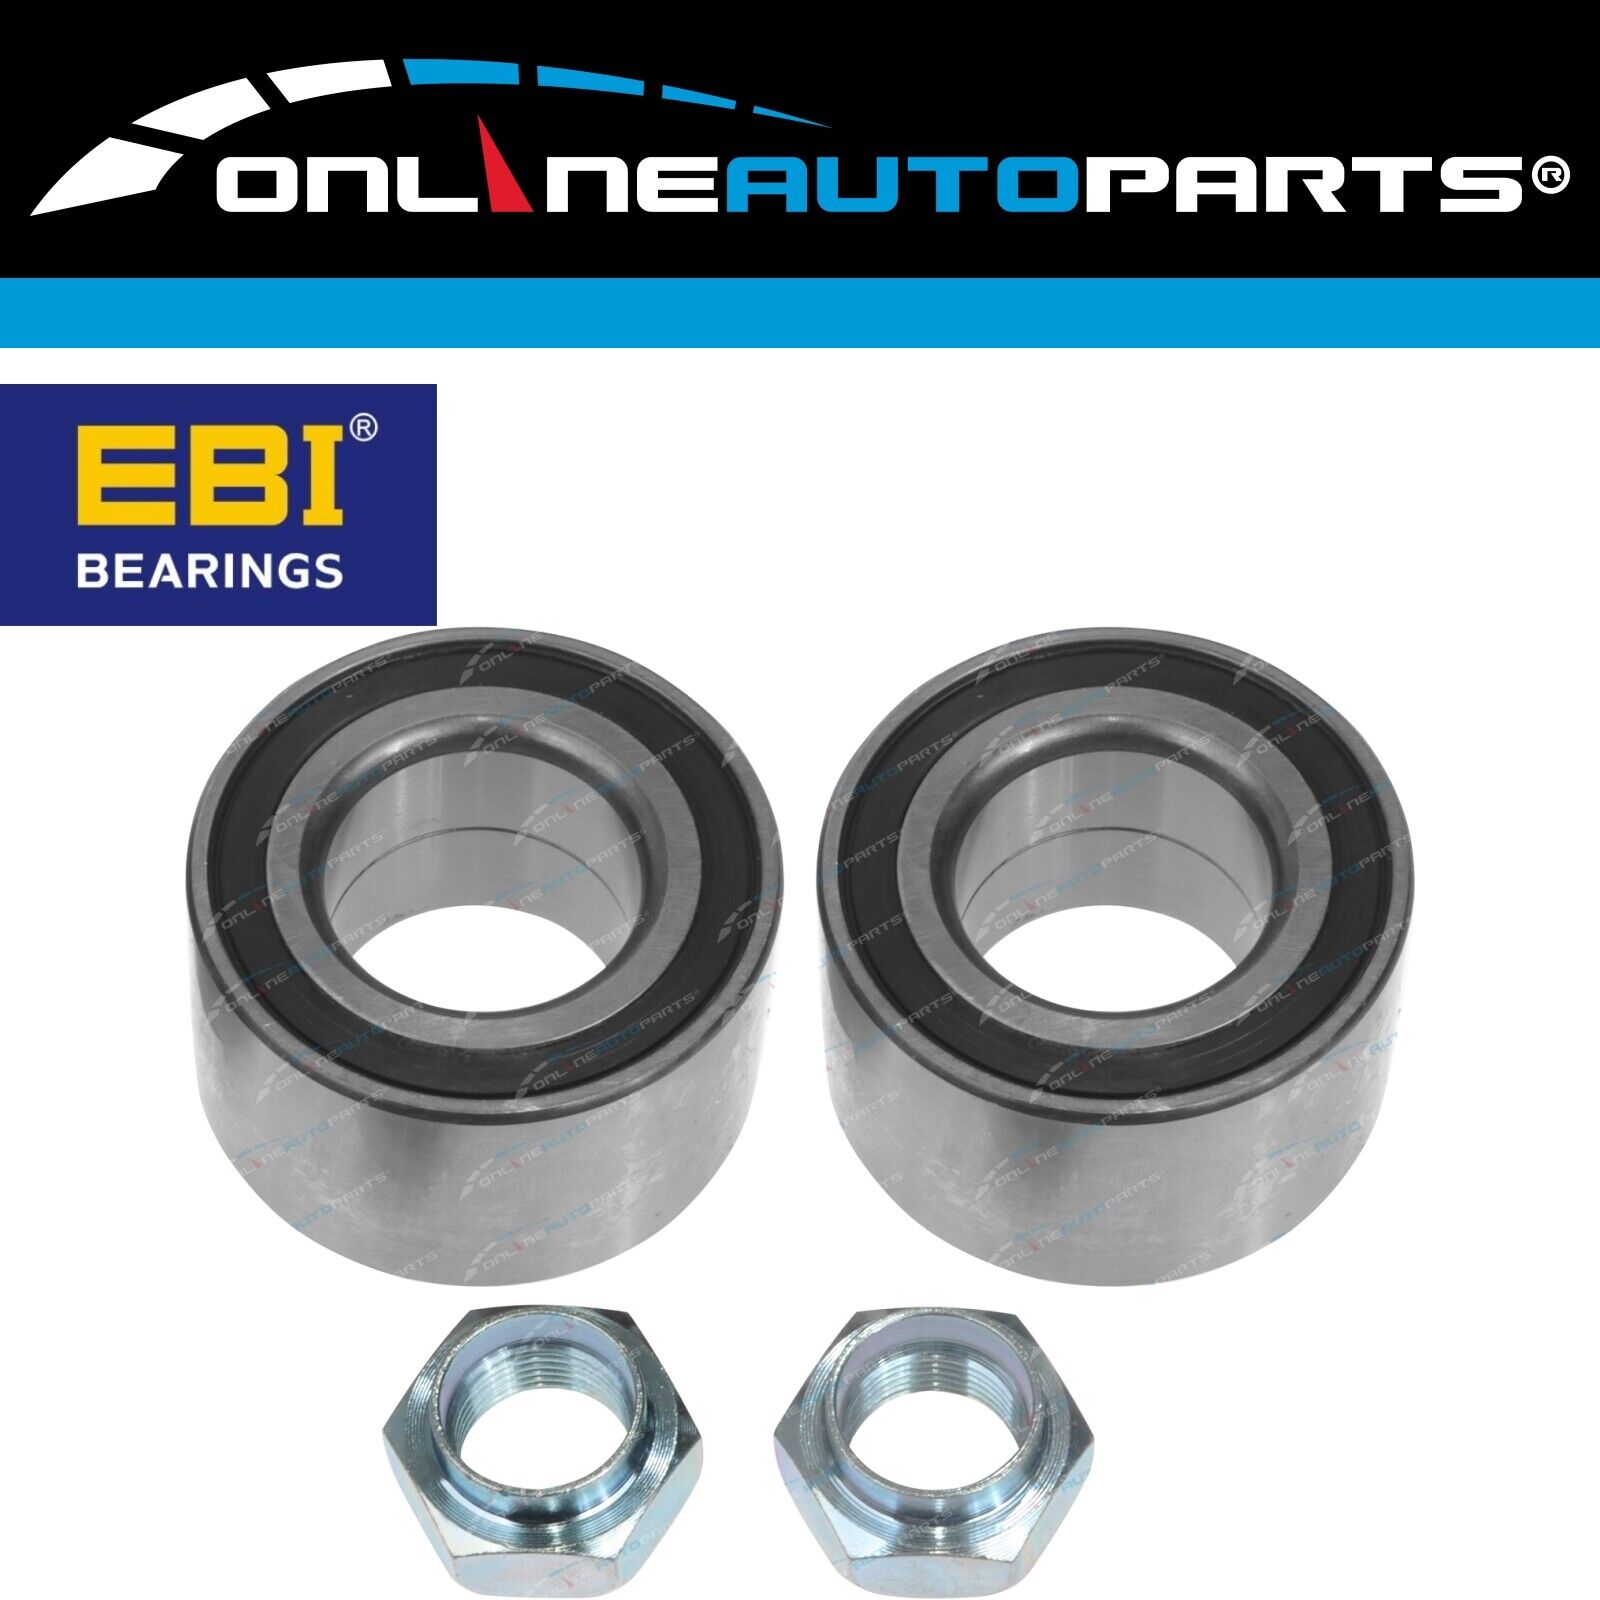 2 x Front Wheel Bearings for Daewoo Cielo 1.5i 4cyl 1.5L G15MF 1995~1997